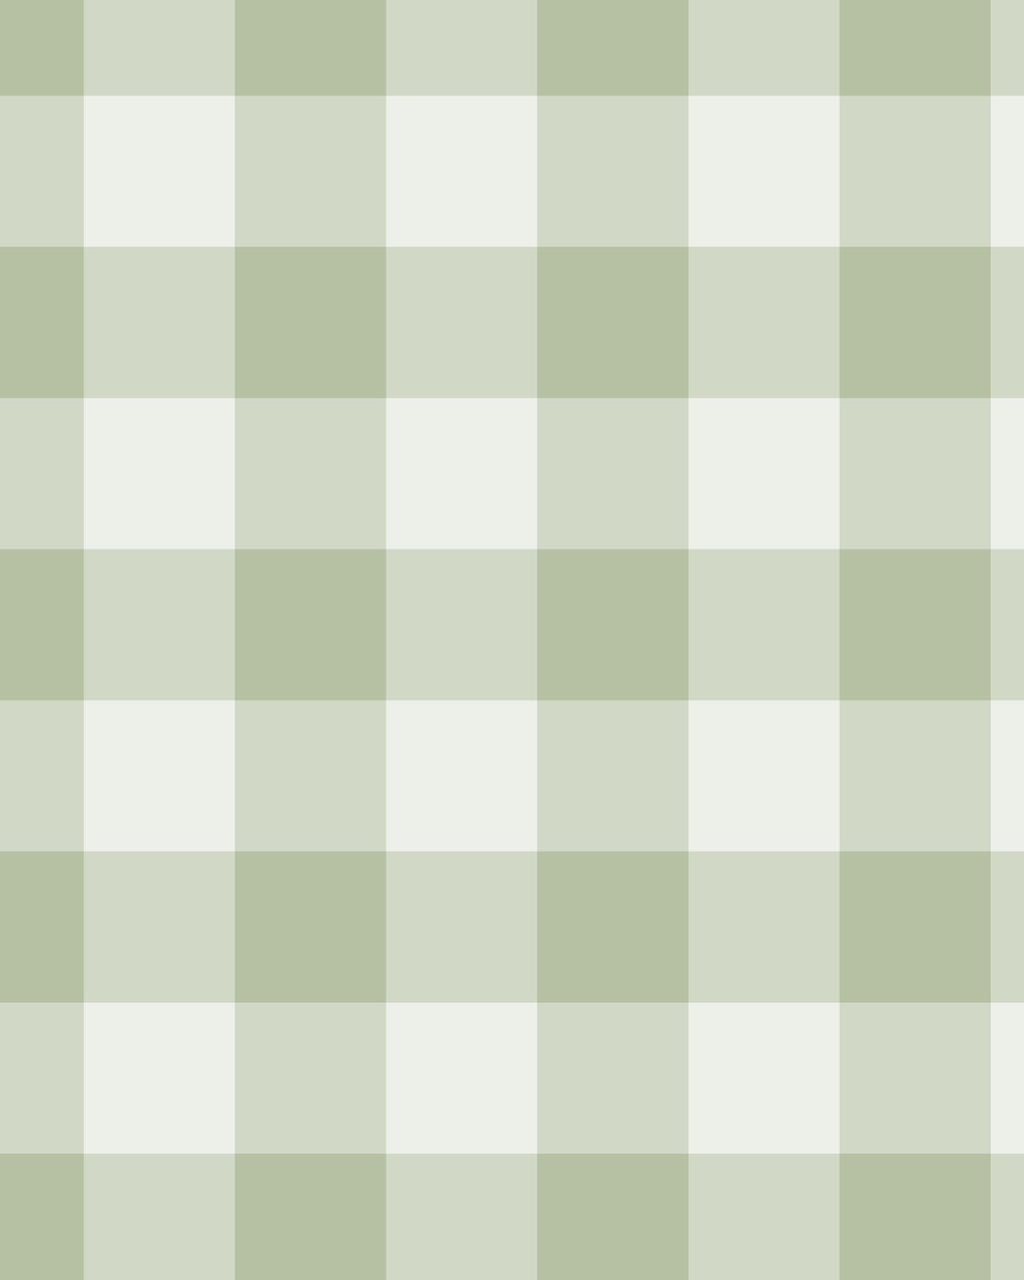 20 Sage Green Aesthetic Wallpaper Backgrounds FREE